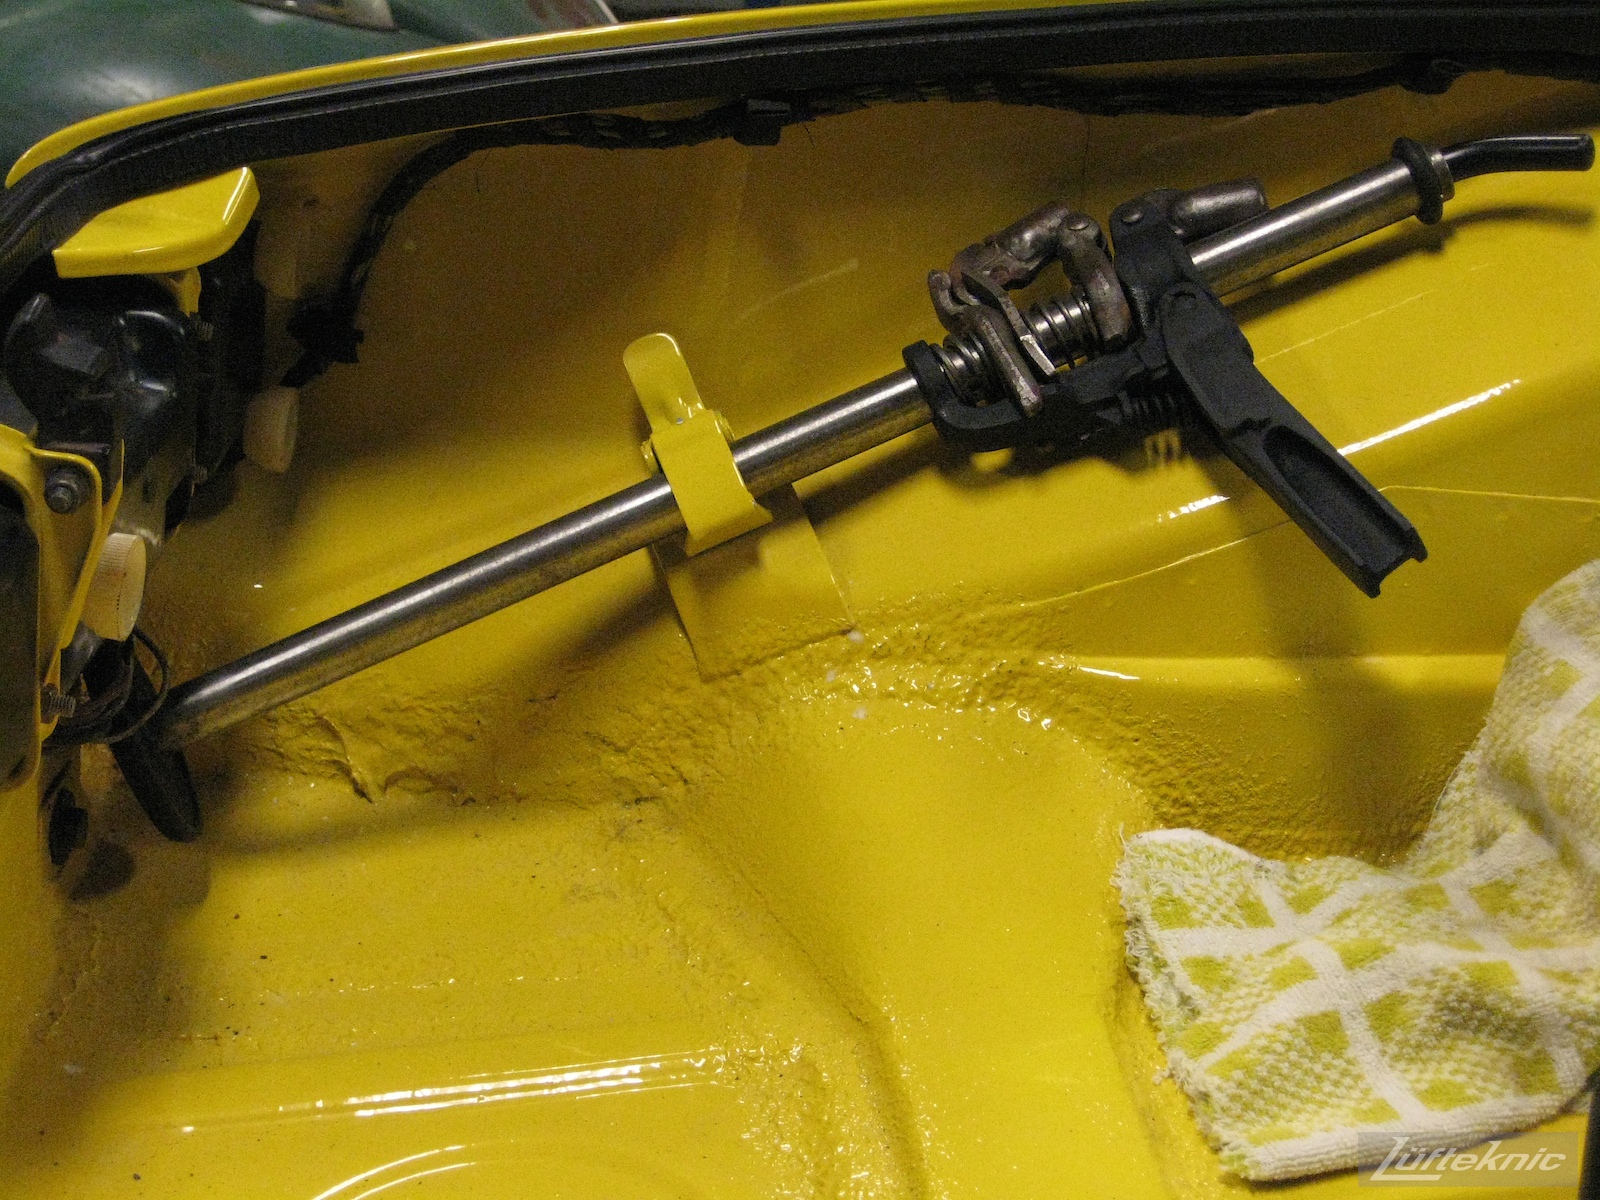 Interior trunk details of a repaired and restored yellow Porsche 914 at Lufteknic.